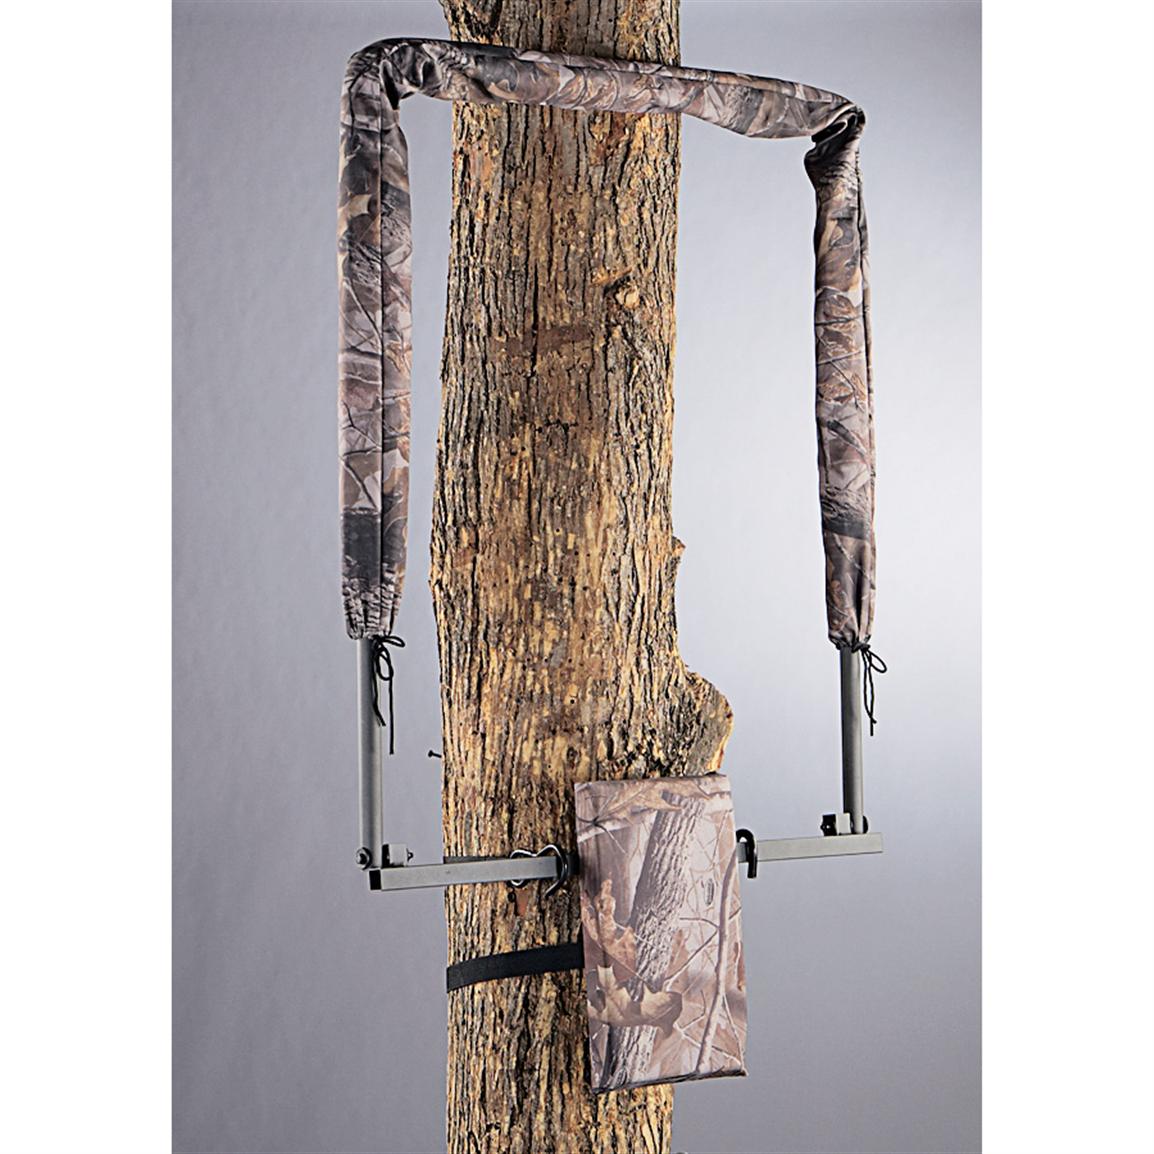 Universal Padded Shooting Rail 120695 Tree Stand Accessories At